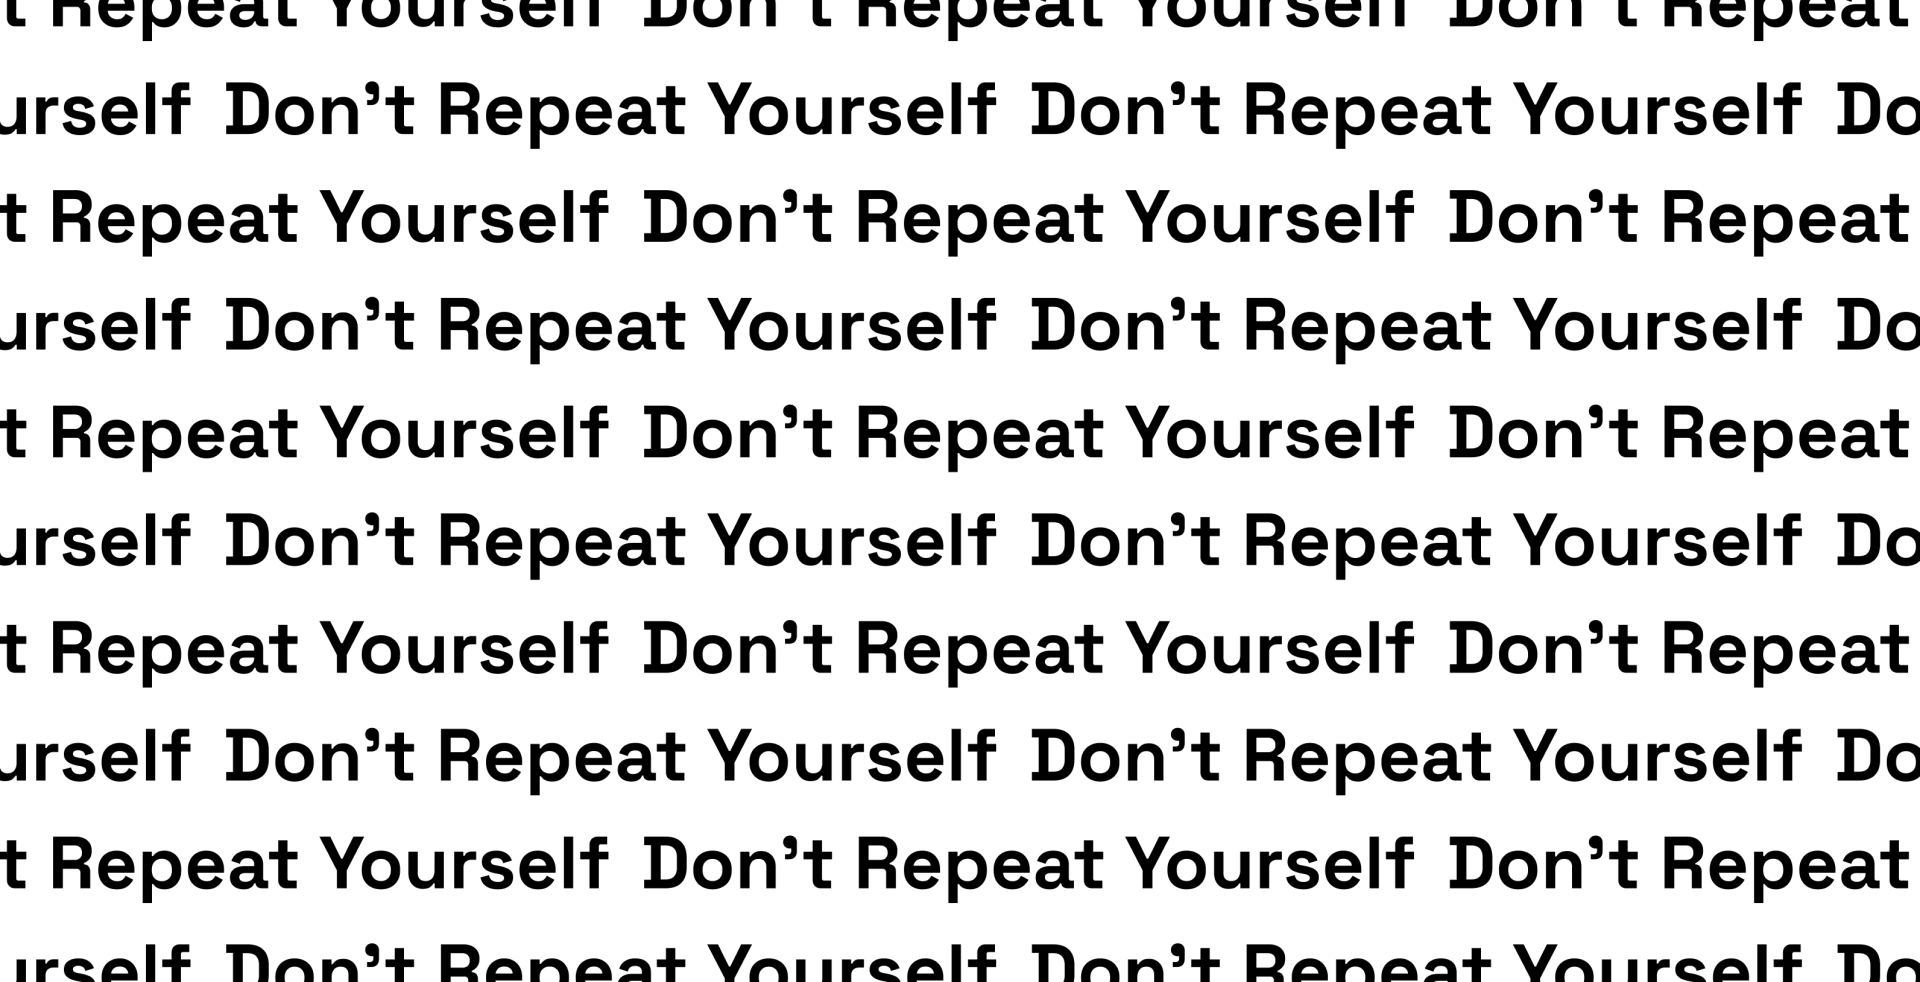 "don't repeat yourself" repeated on a white background